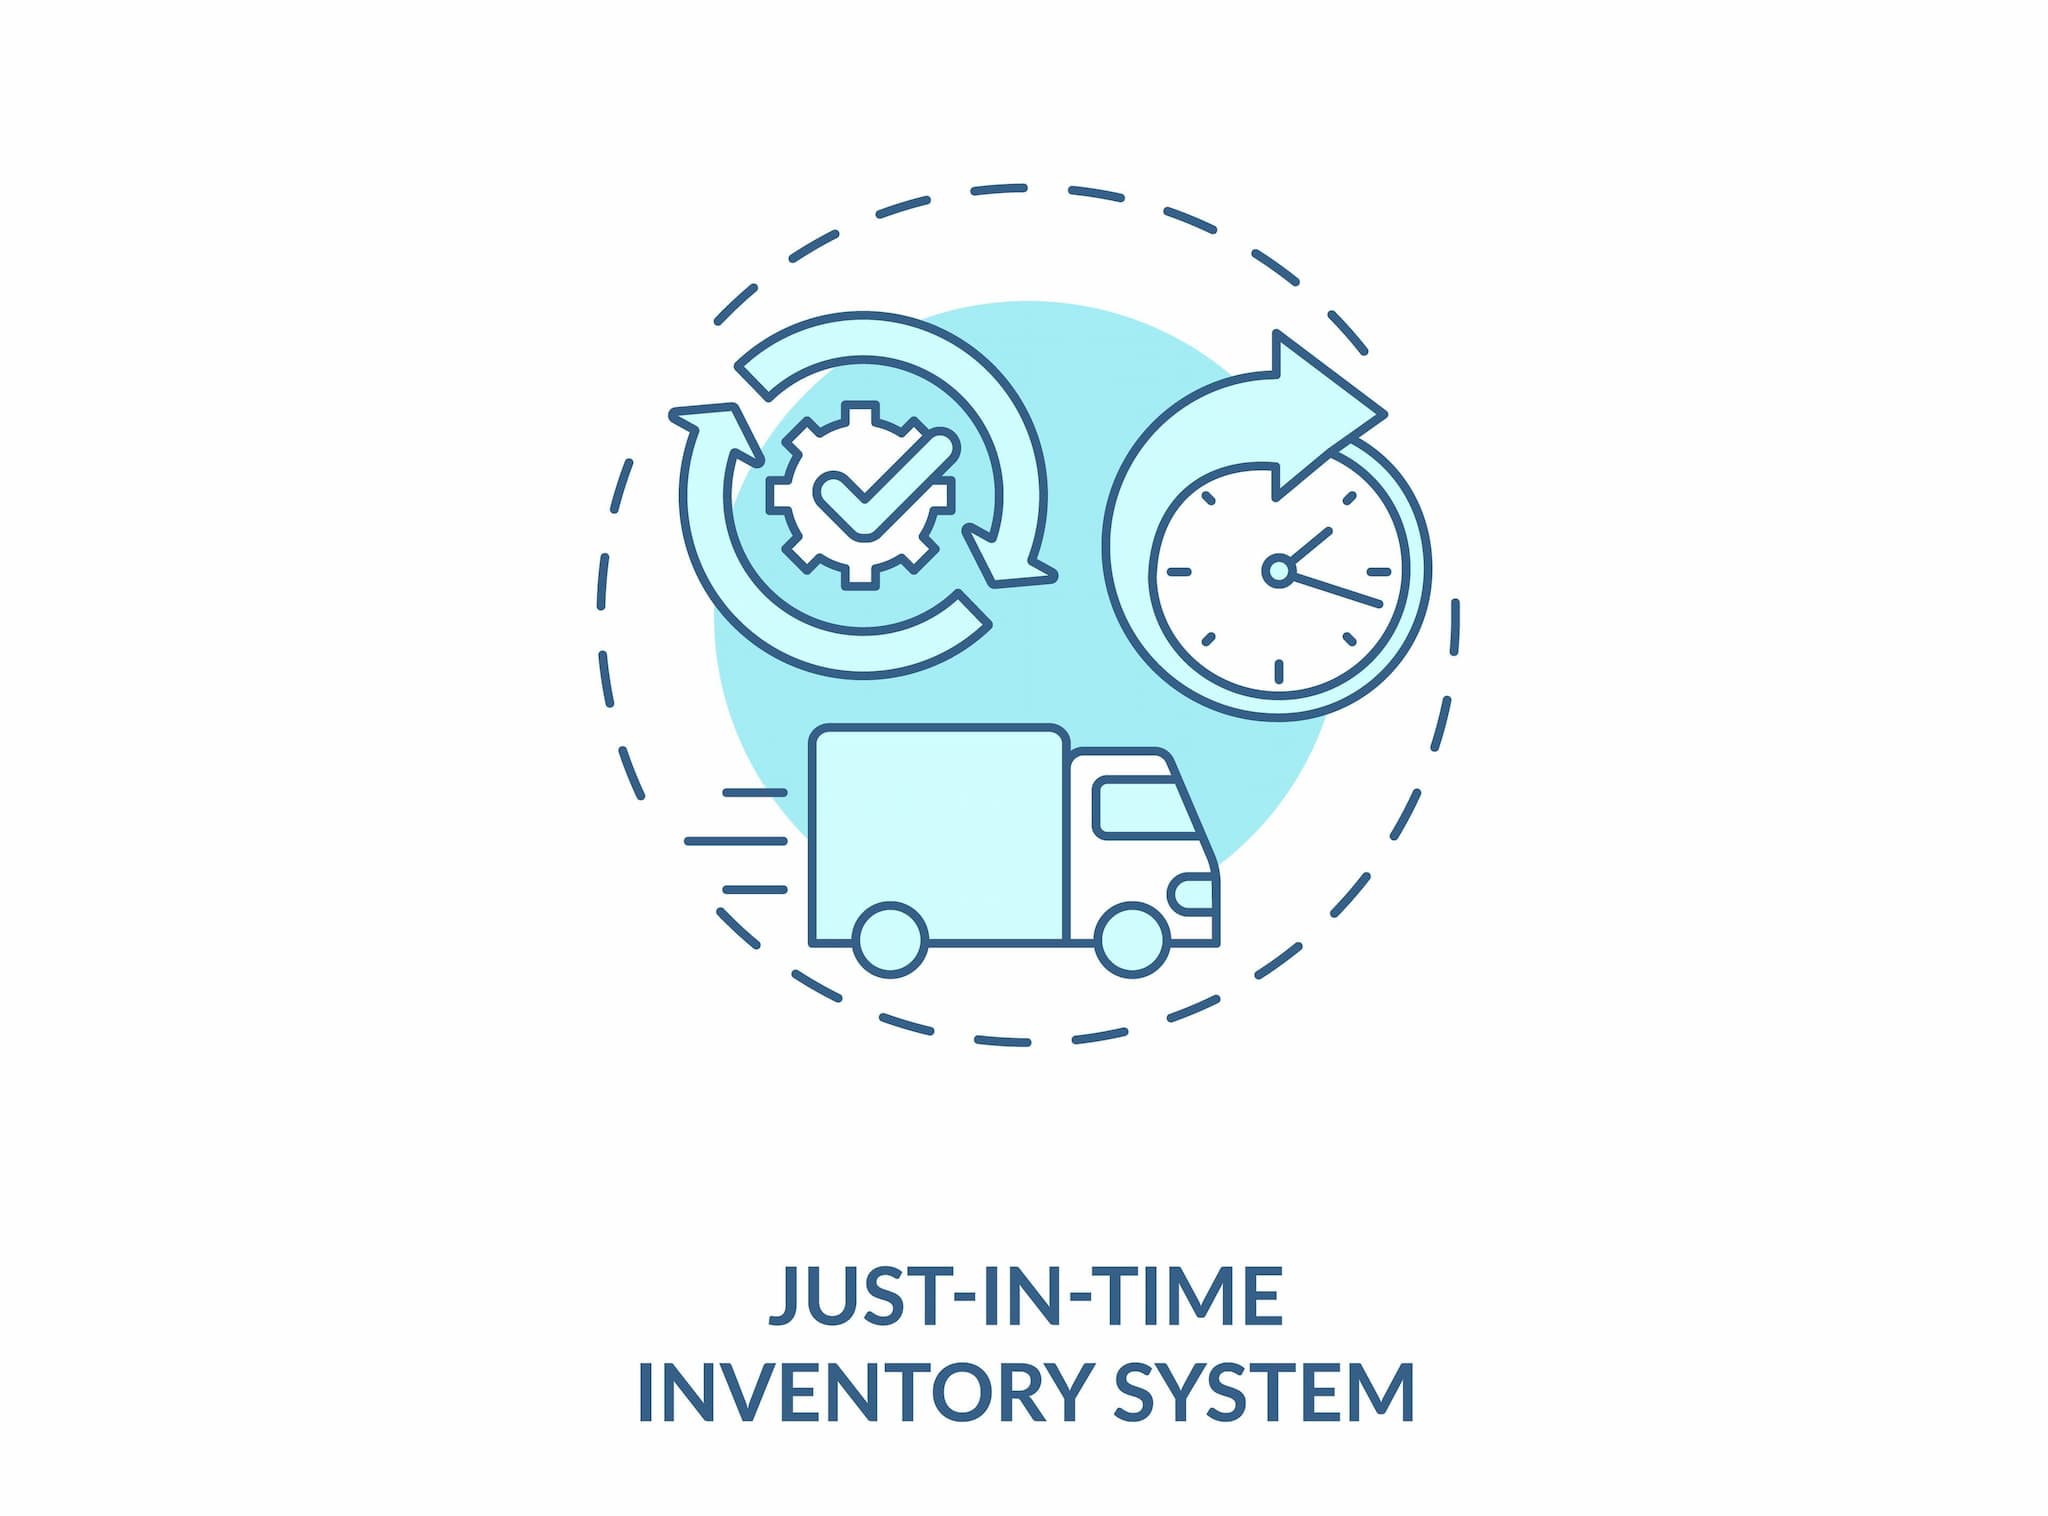 icon or truck and clock with just-in-time inventory system text